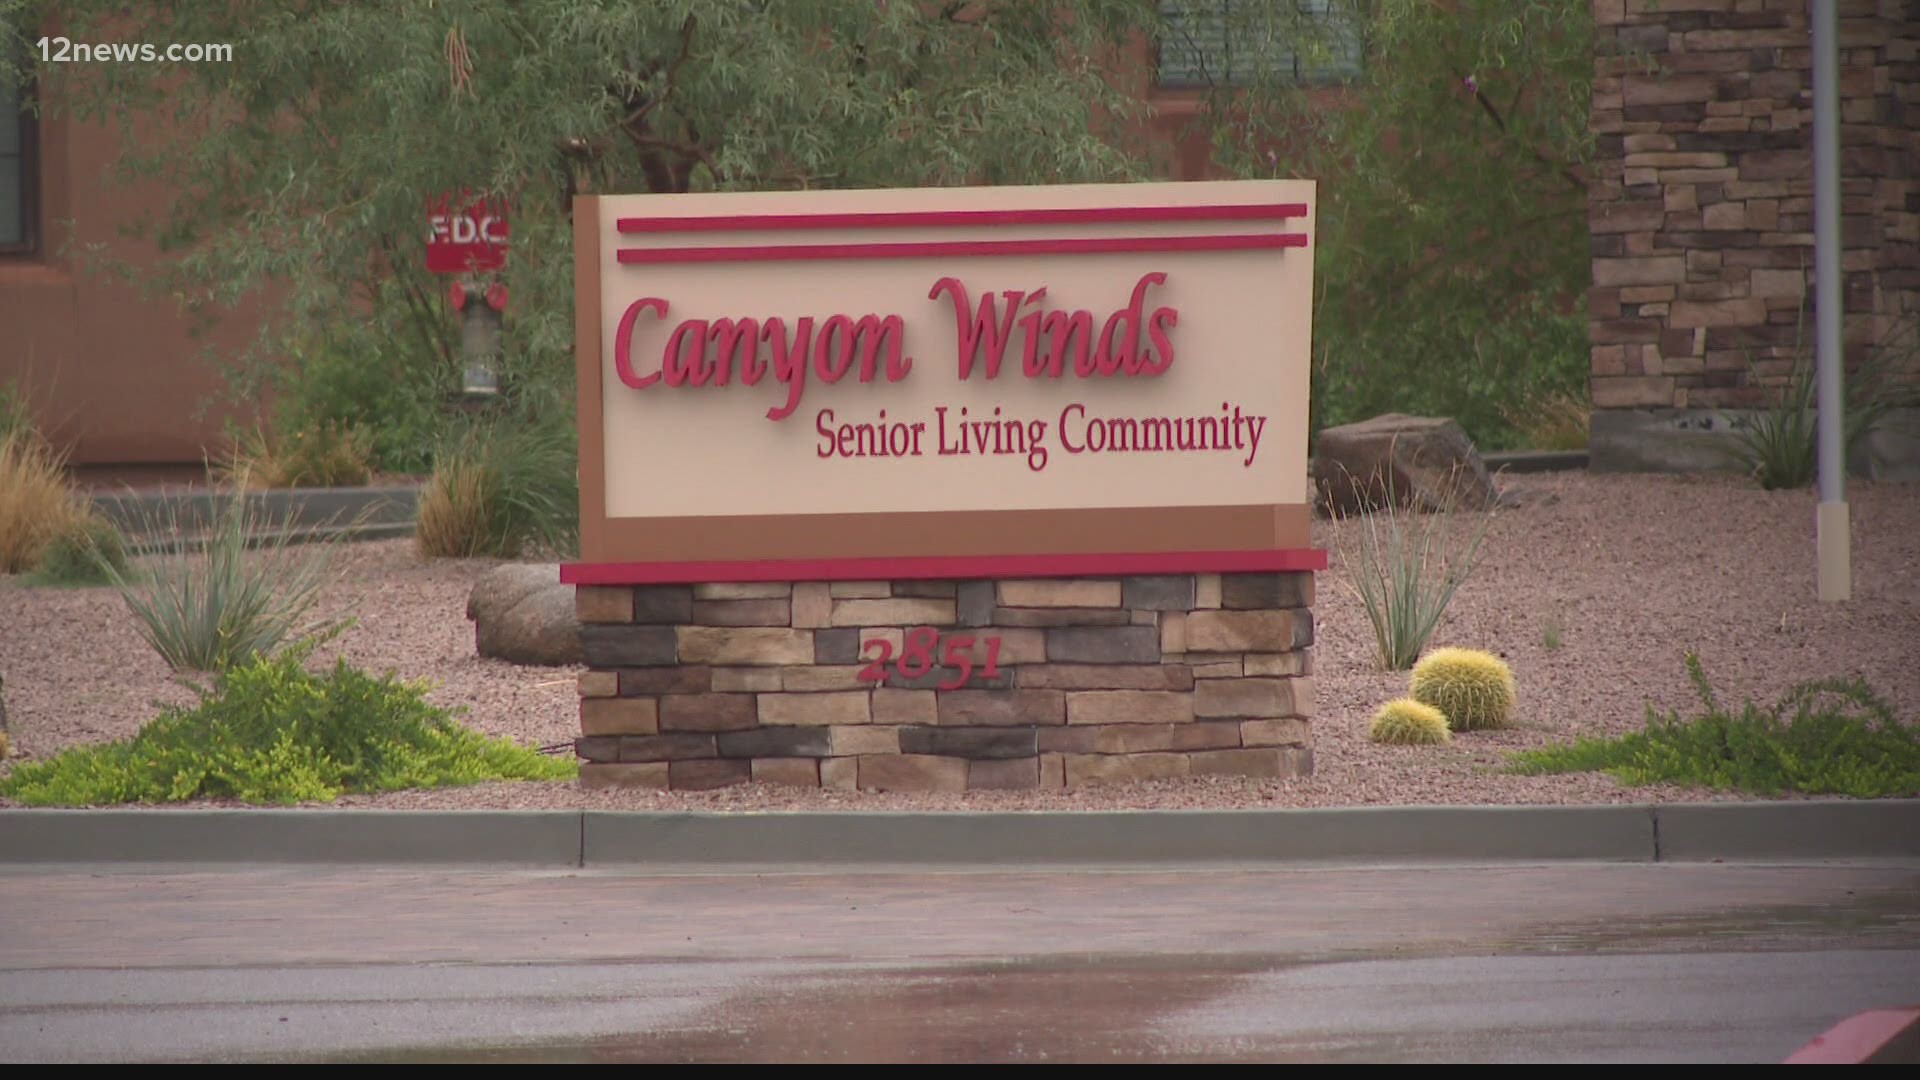 A 90-year-old man died Thursday afternoon after police said he was left in a van outside a Mesa retirement facility.